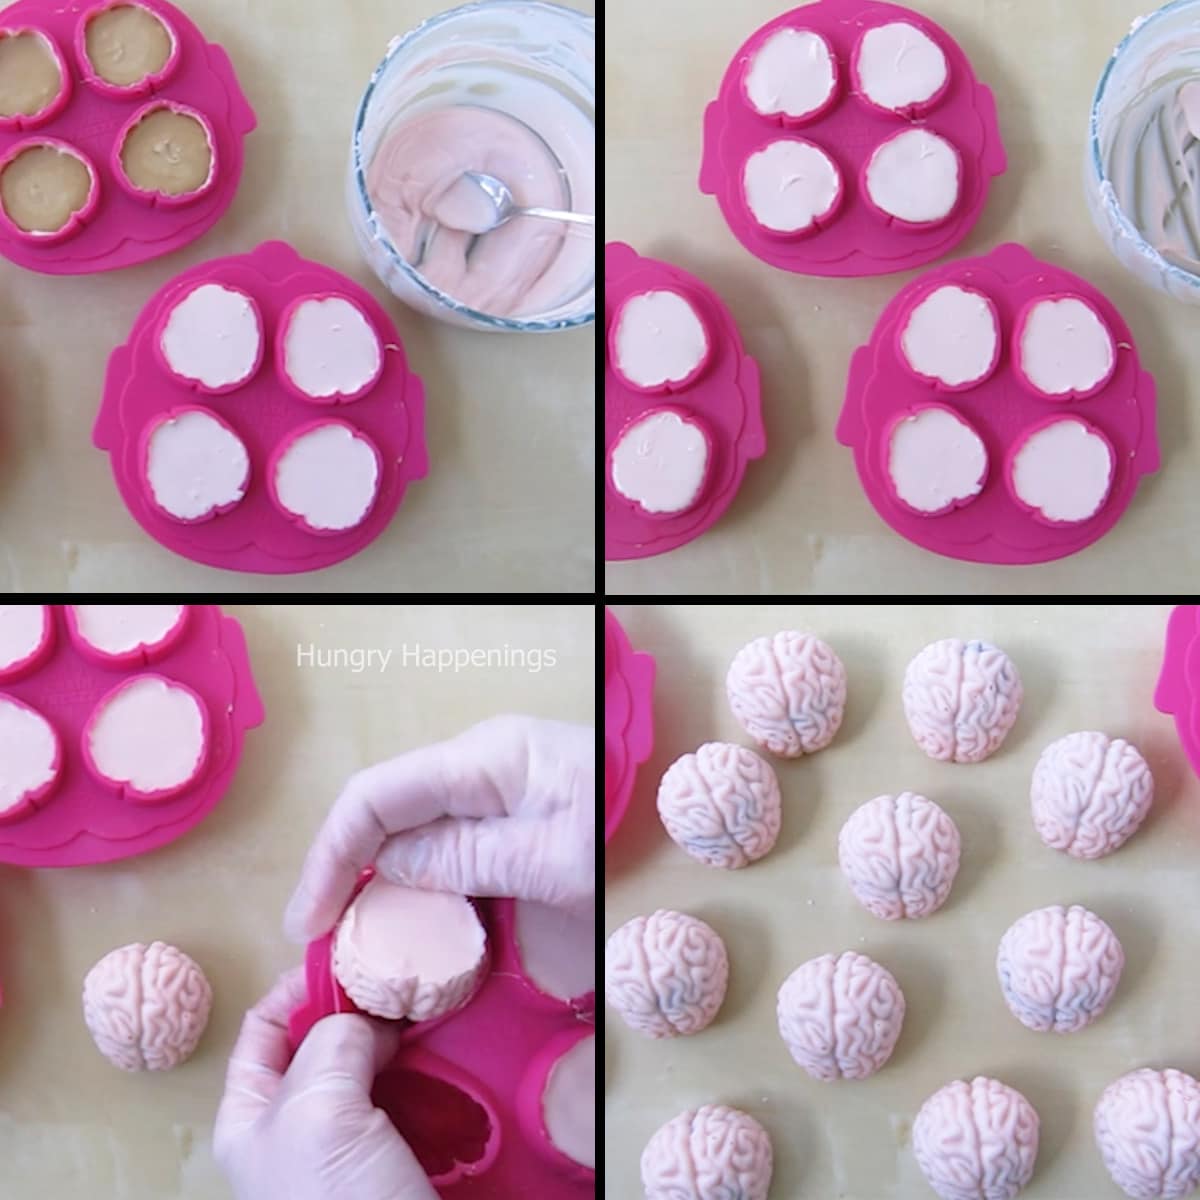 unmolding candy brains from silicone brain molds. 